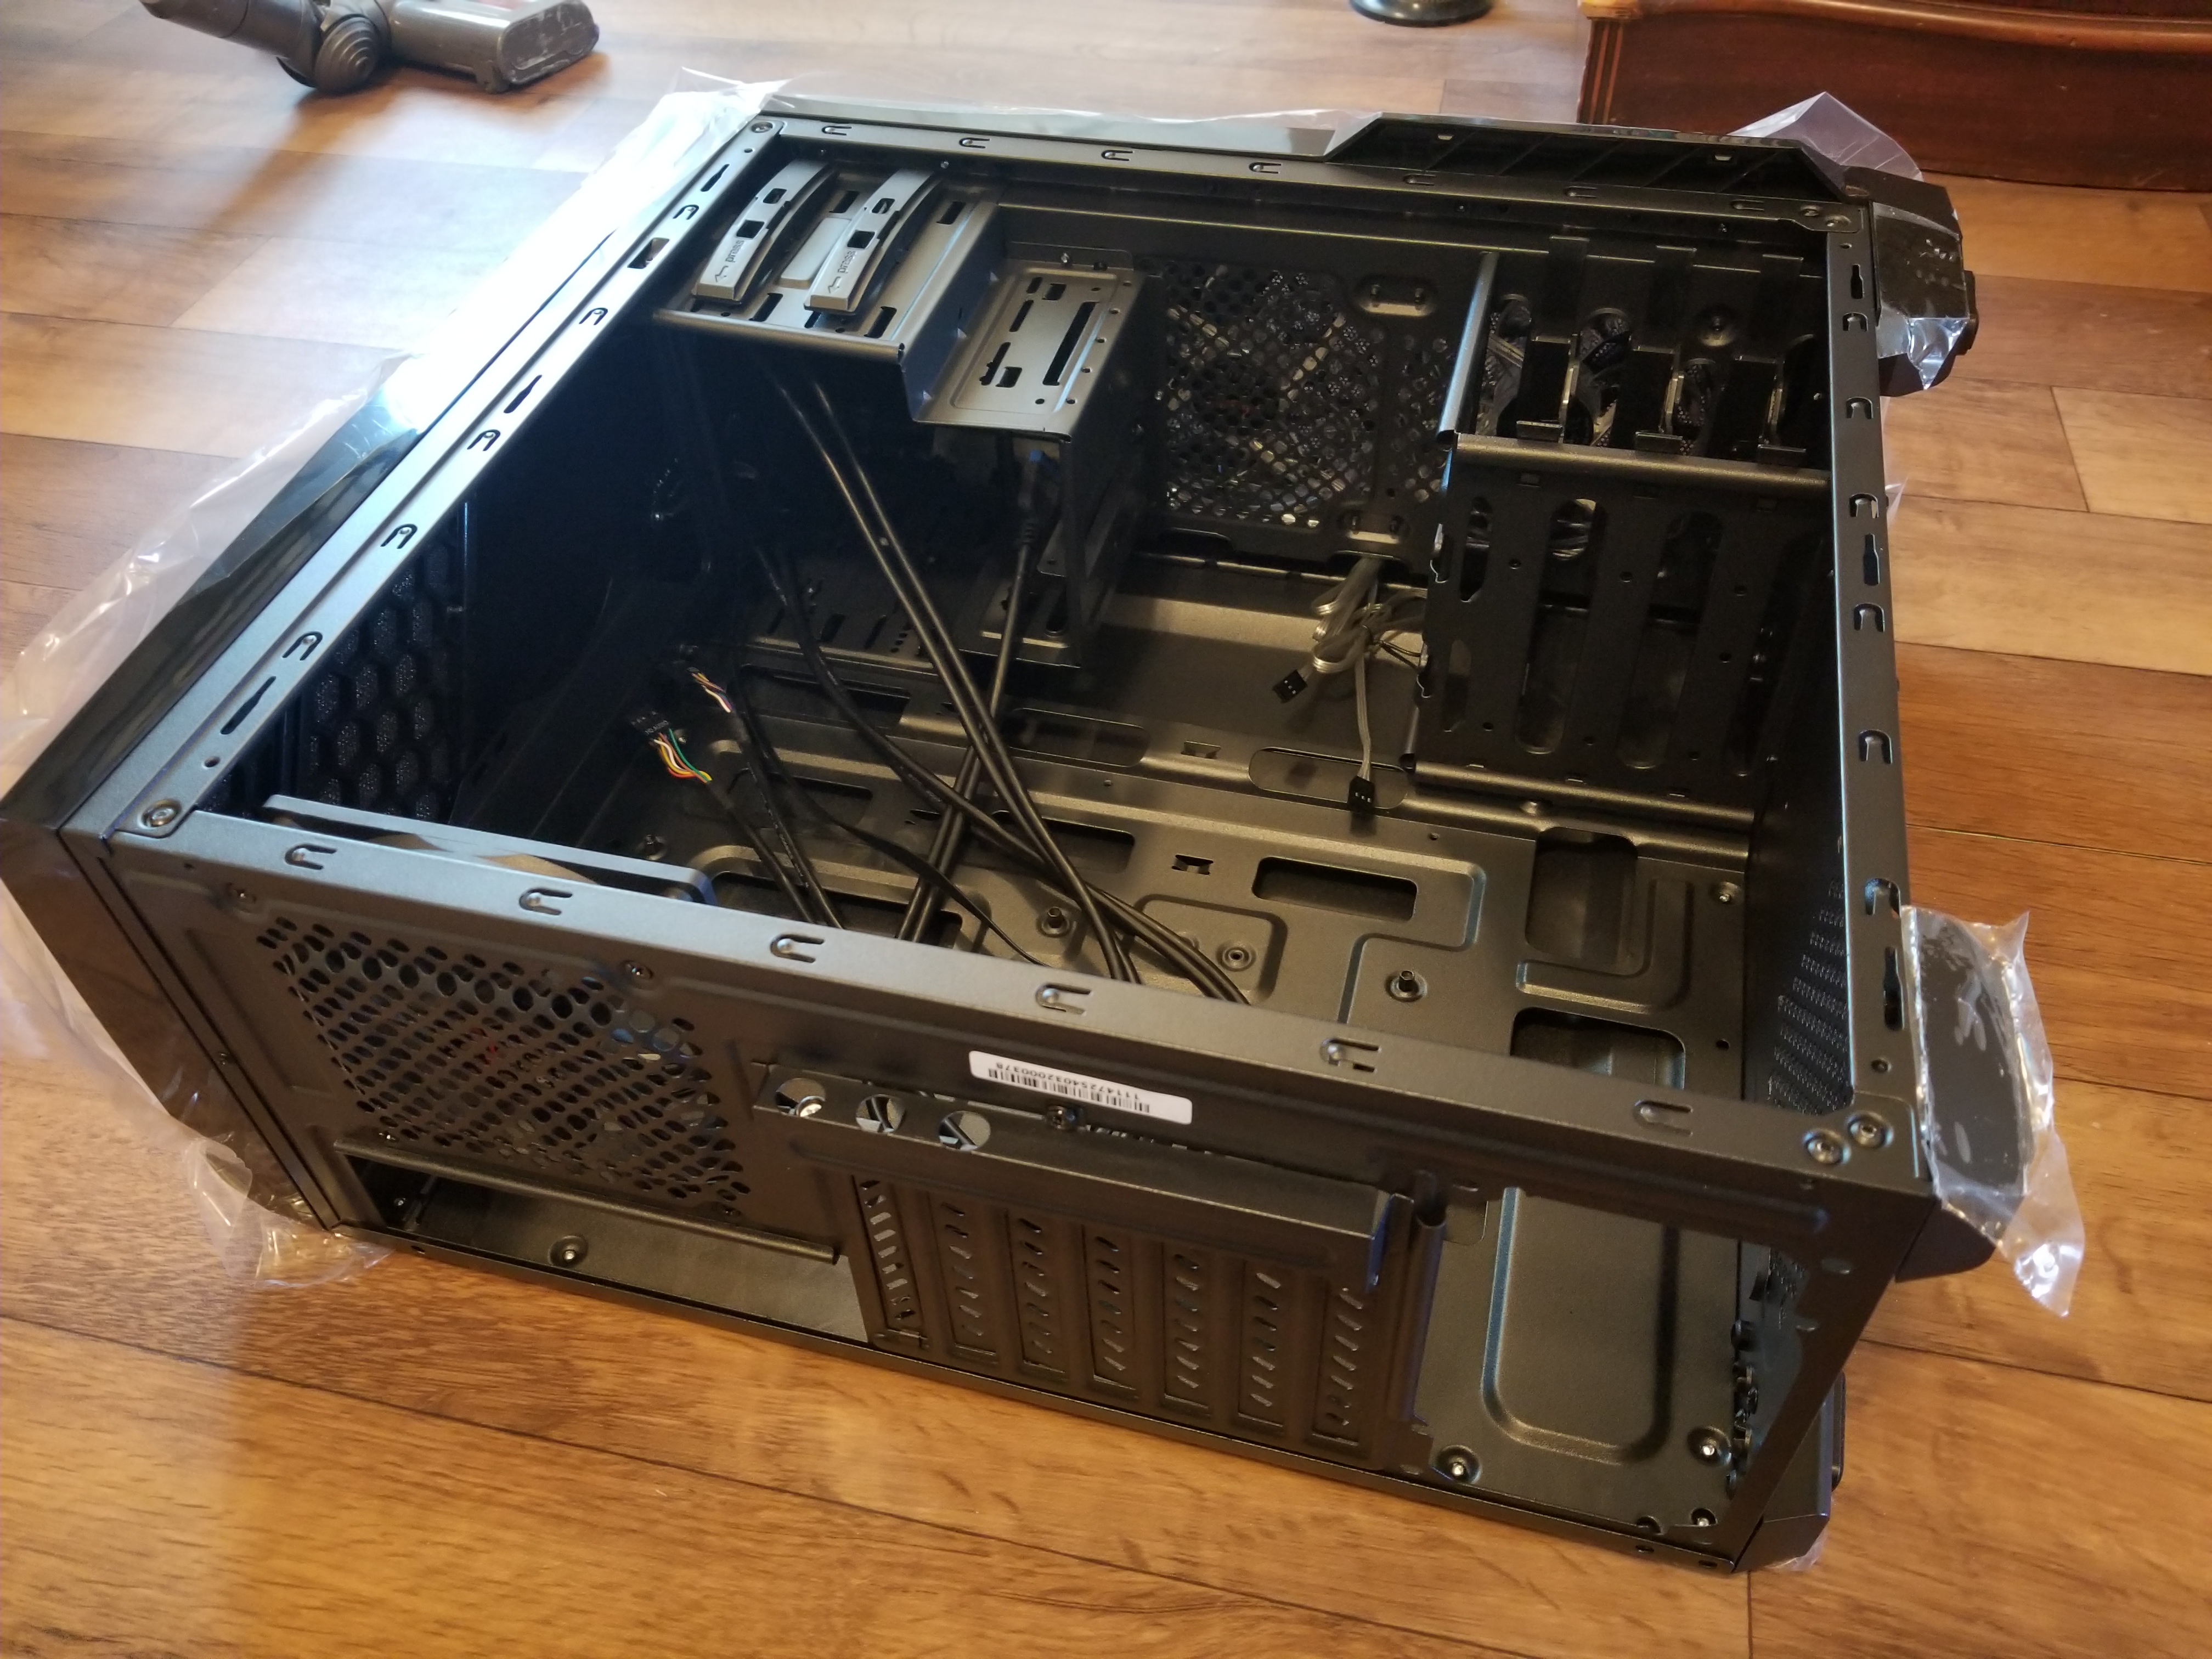 My hollow computer case before I built my computer